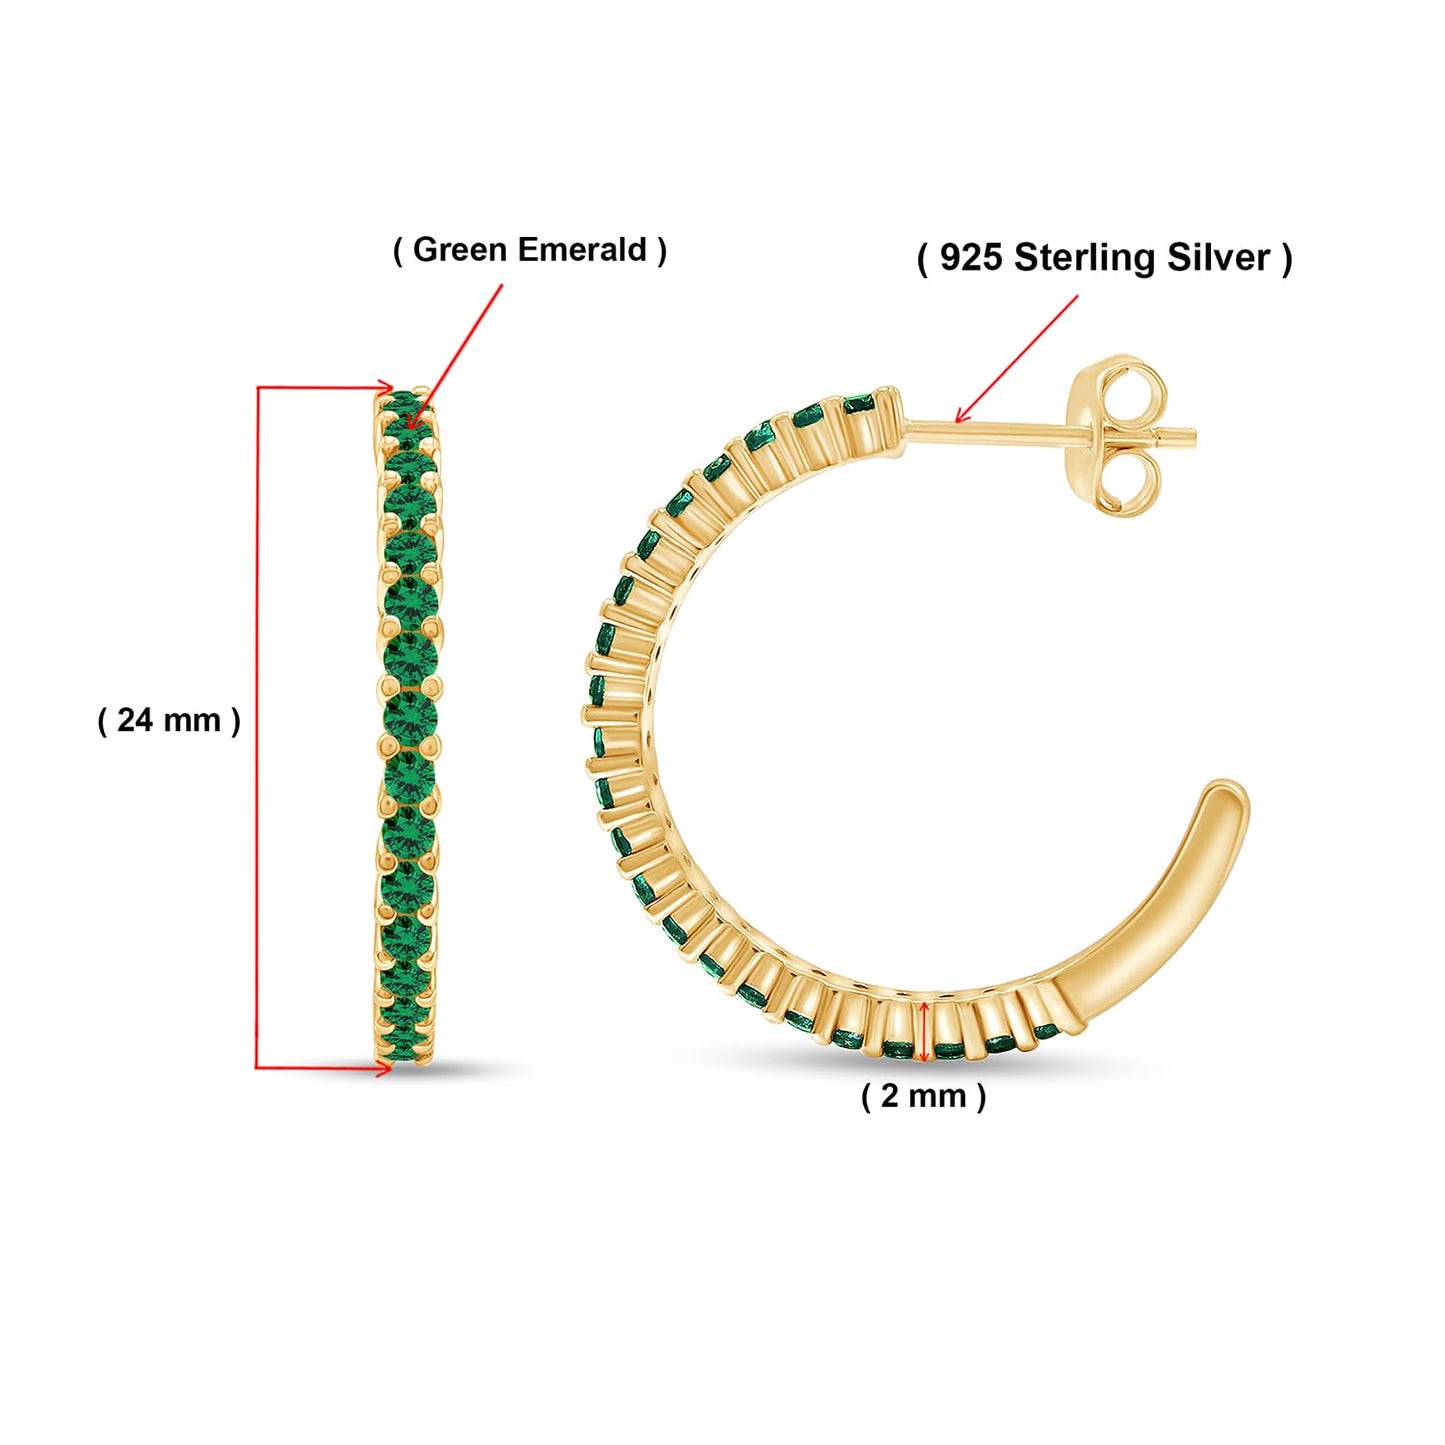 Round Simulated Green Emerald Single Row Hoop Earrings For Women In 925 Sterling Silver